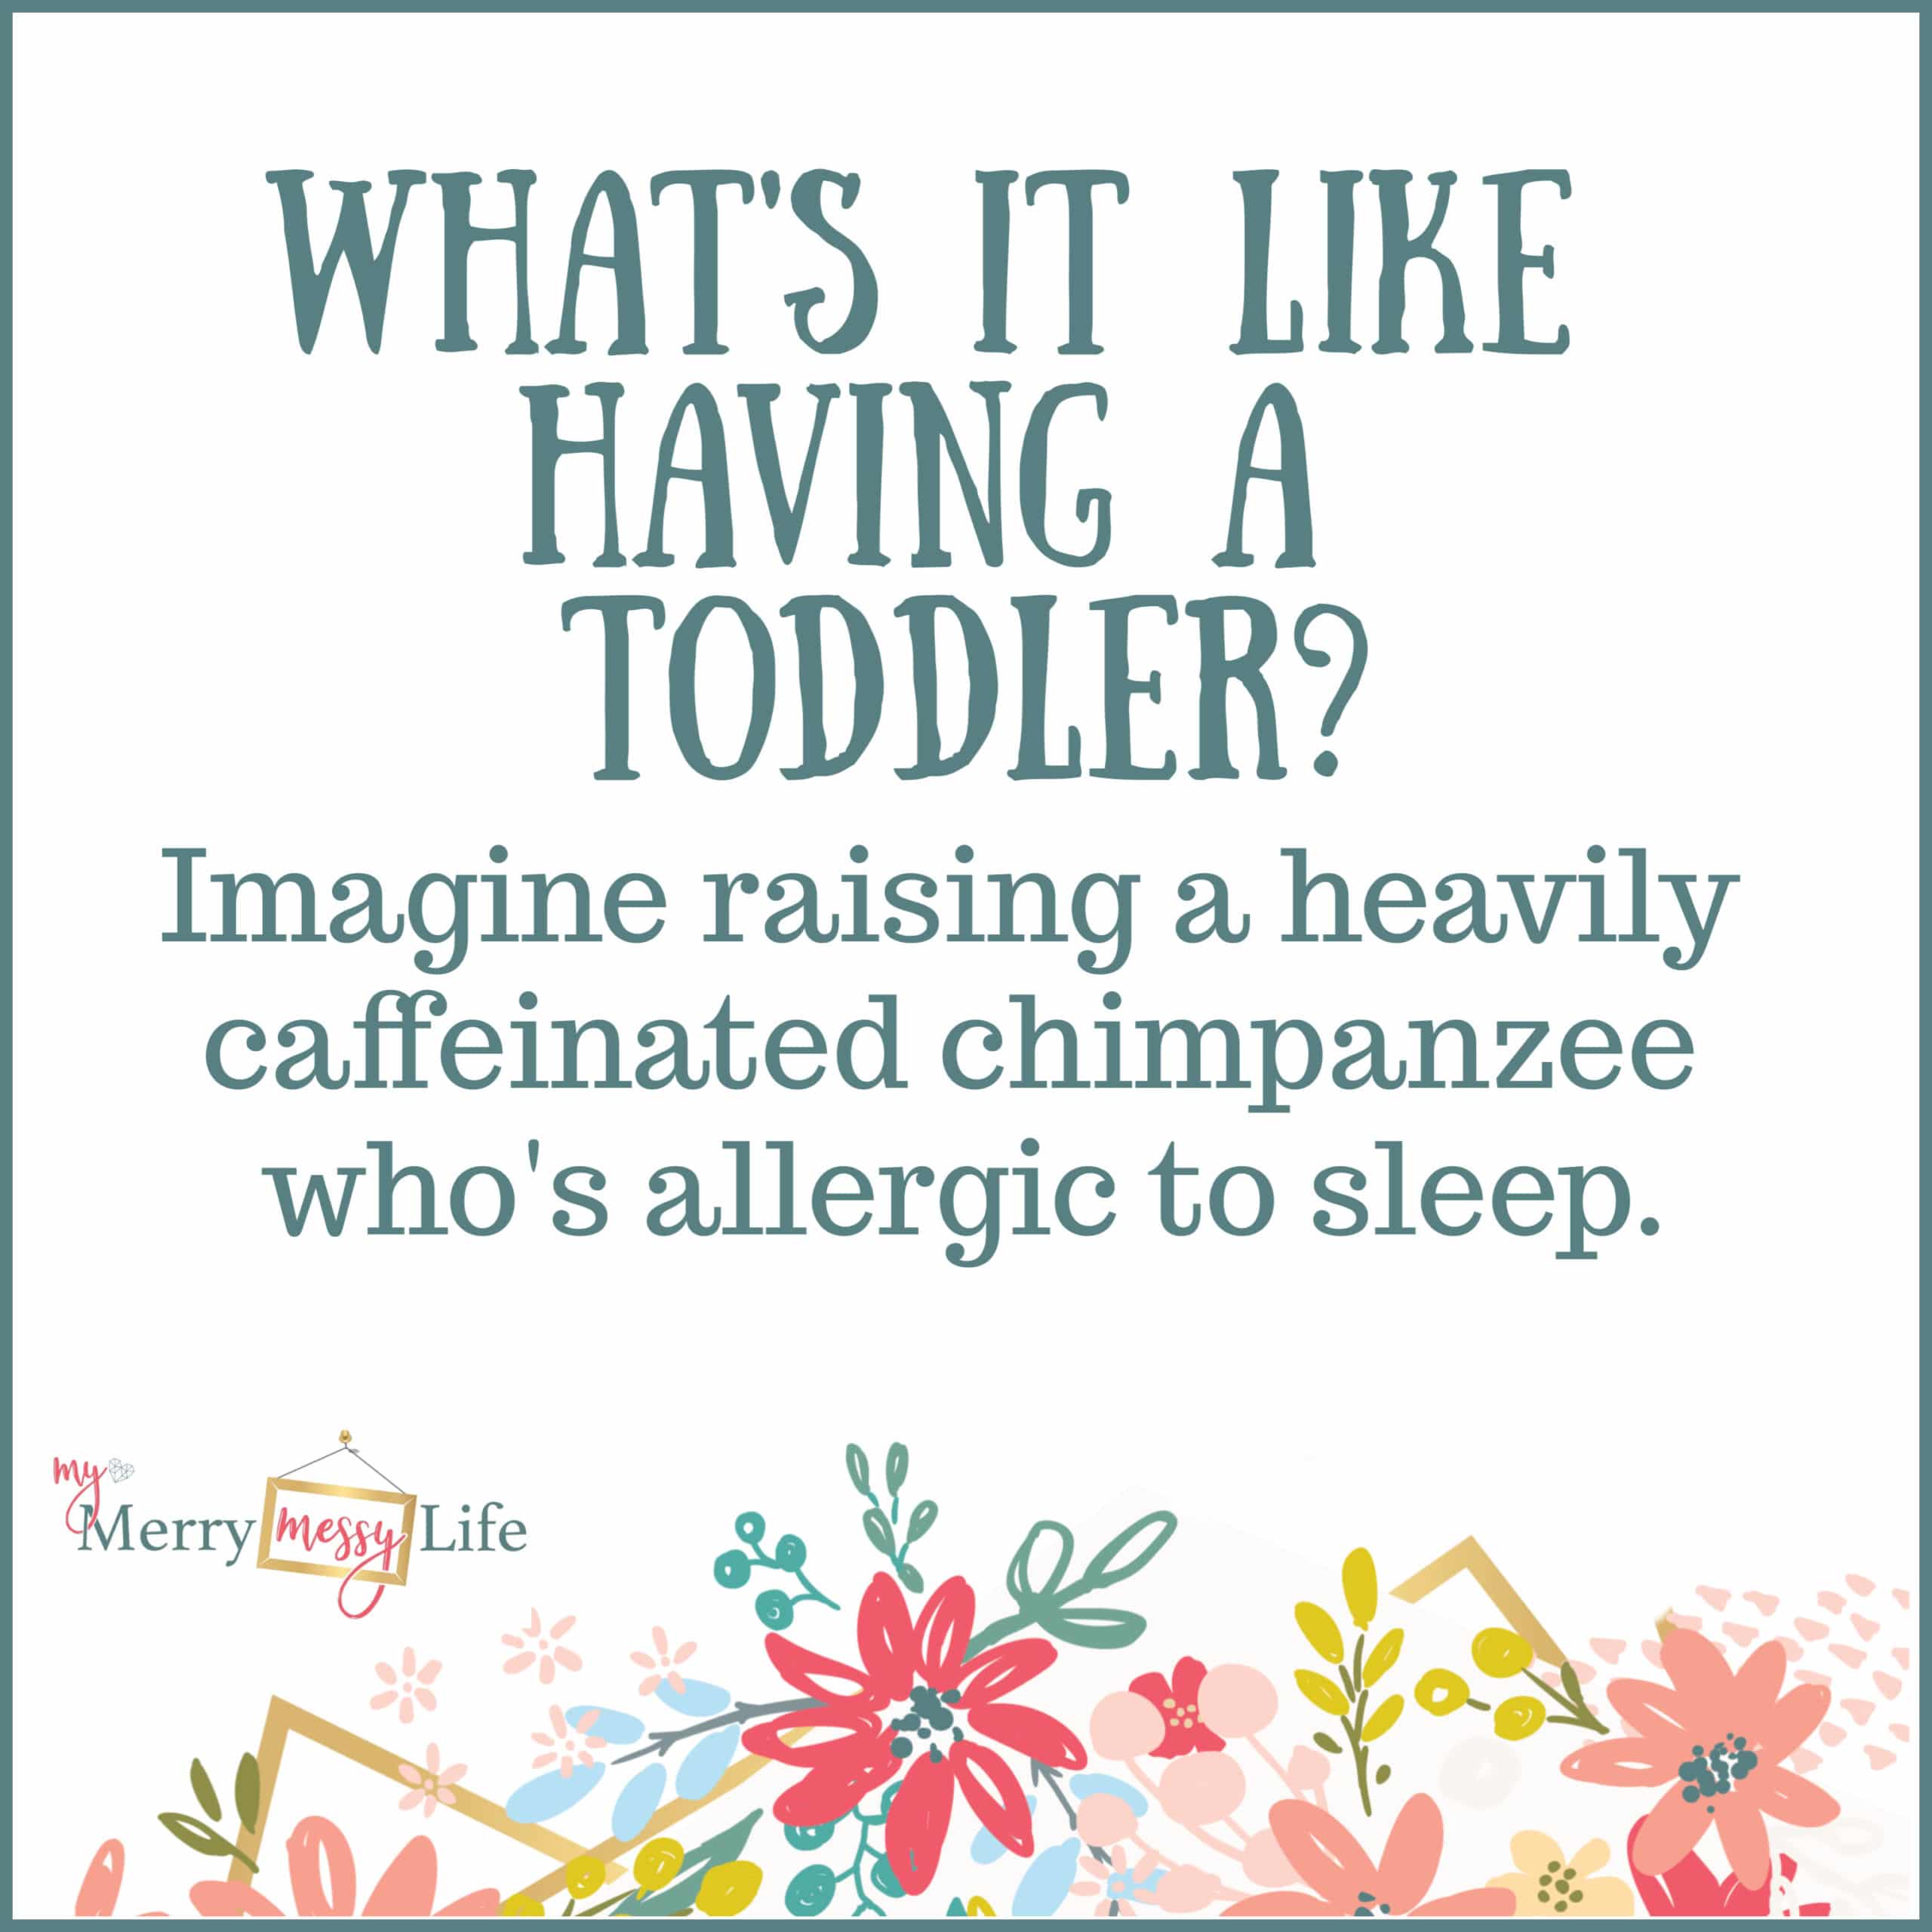 Funny Mom Memes about Toddlers – My Merry Messy Life